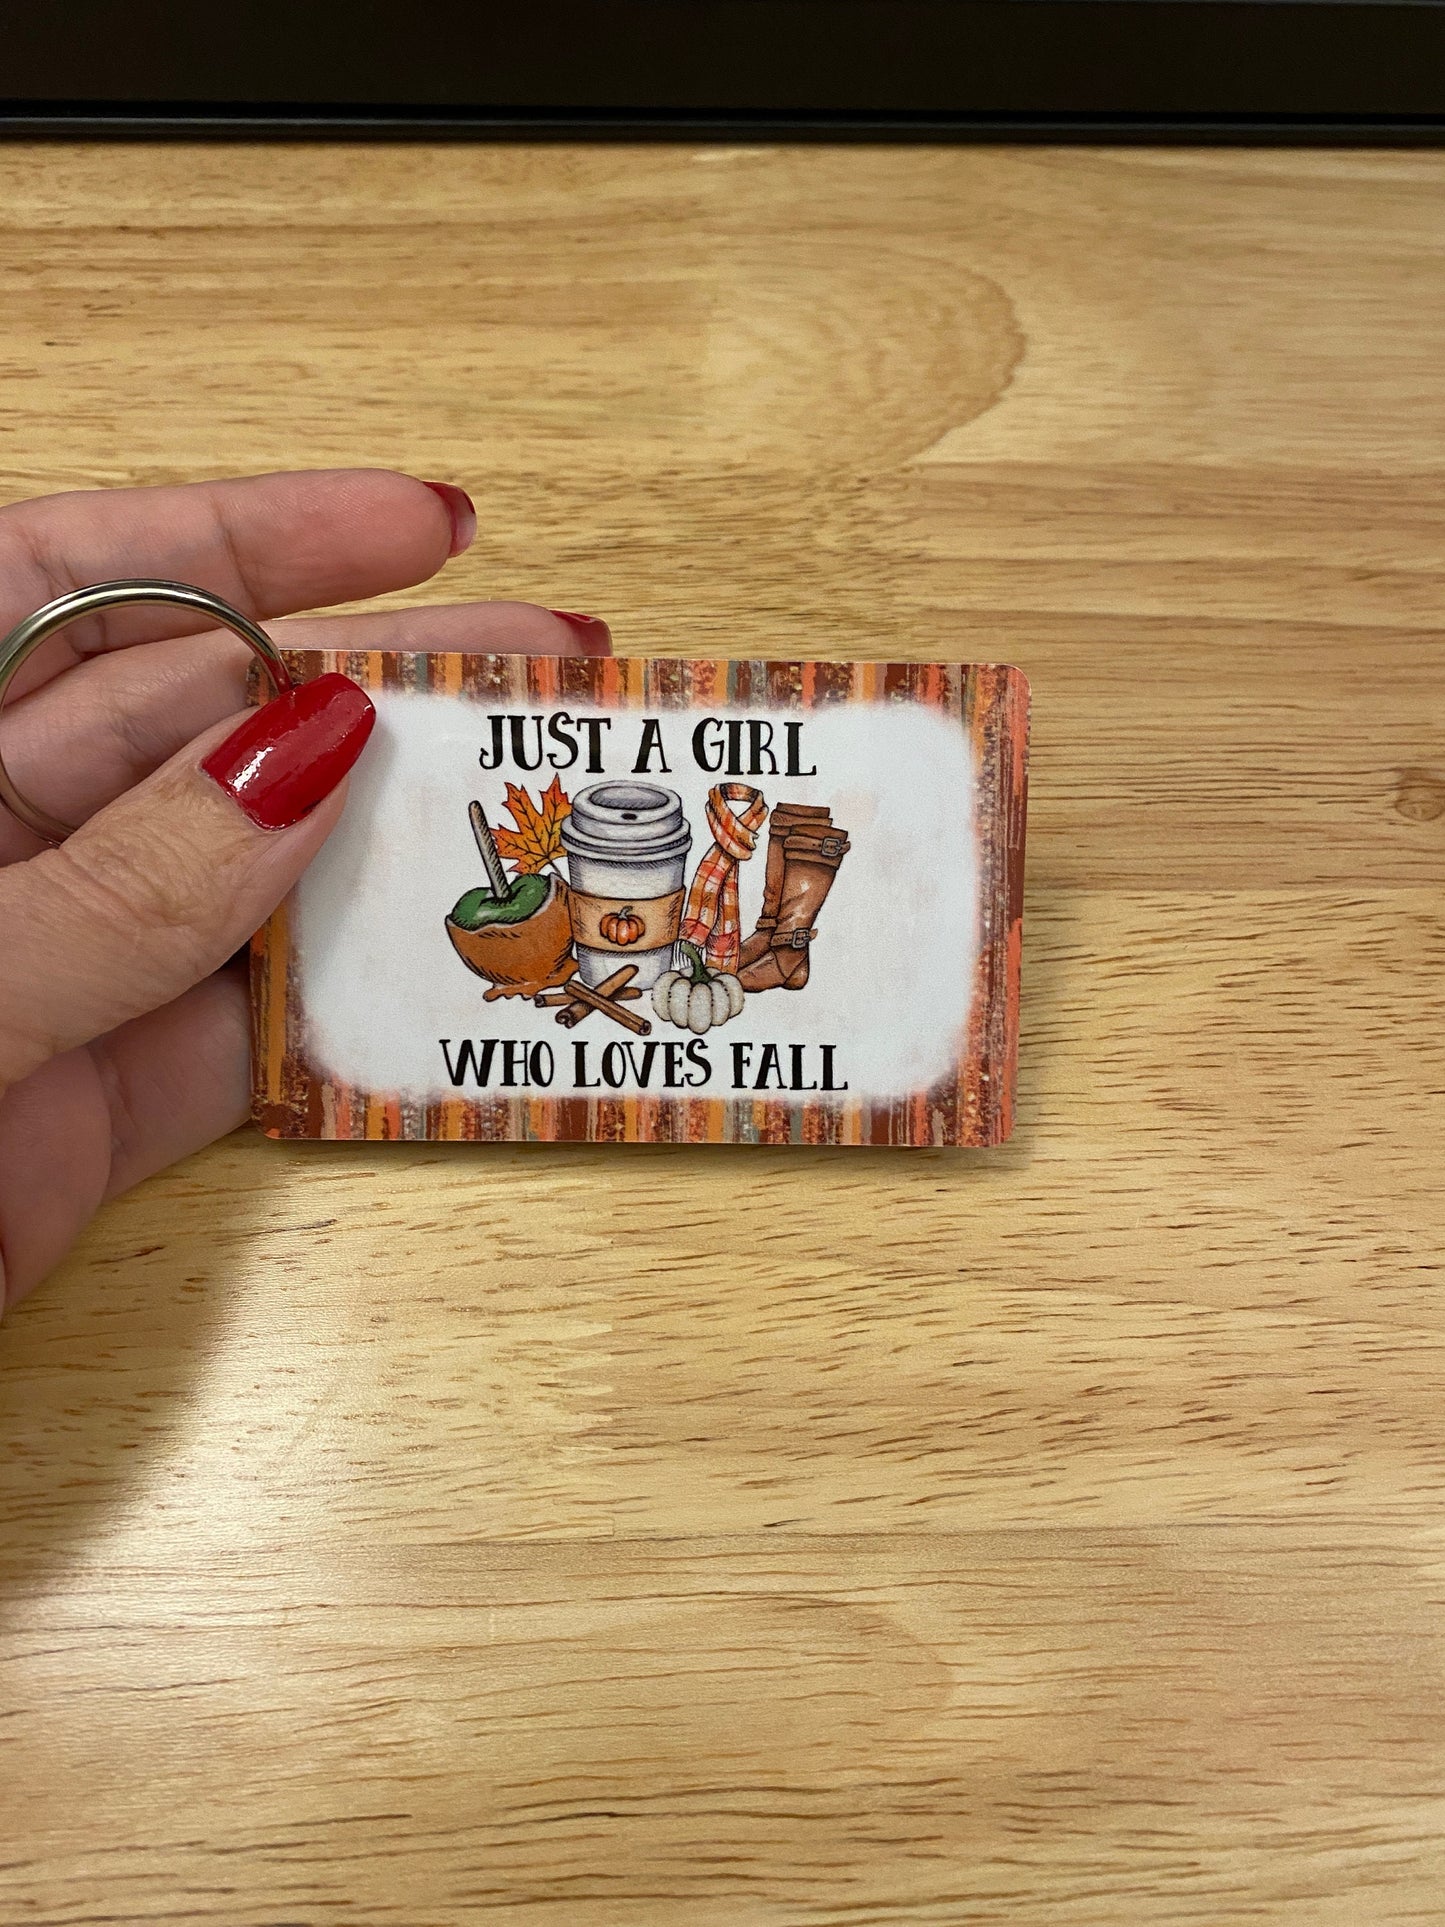 Just a Girl who Loves Fall Key Chain Double Sided